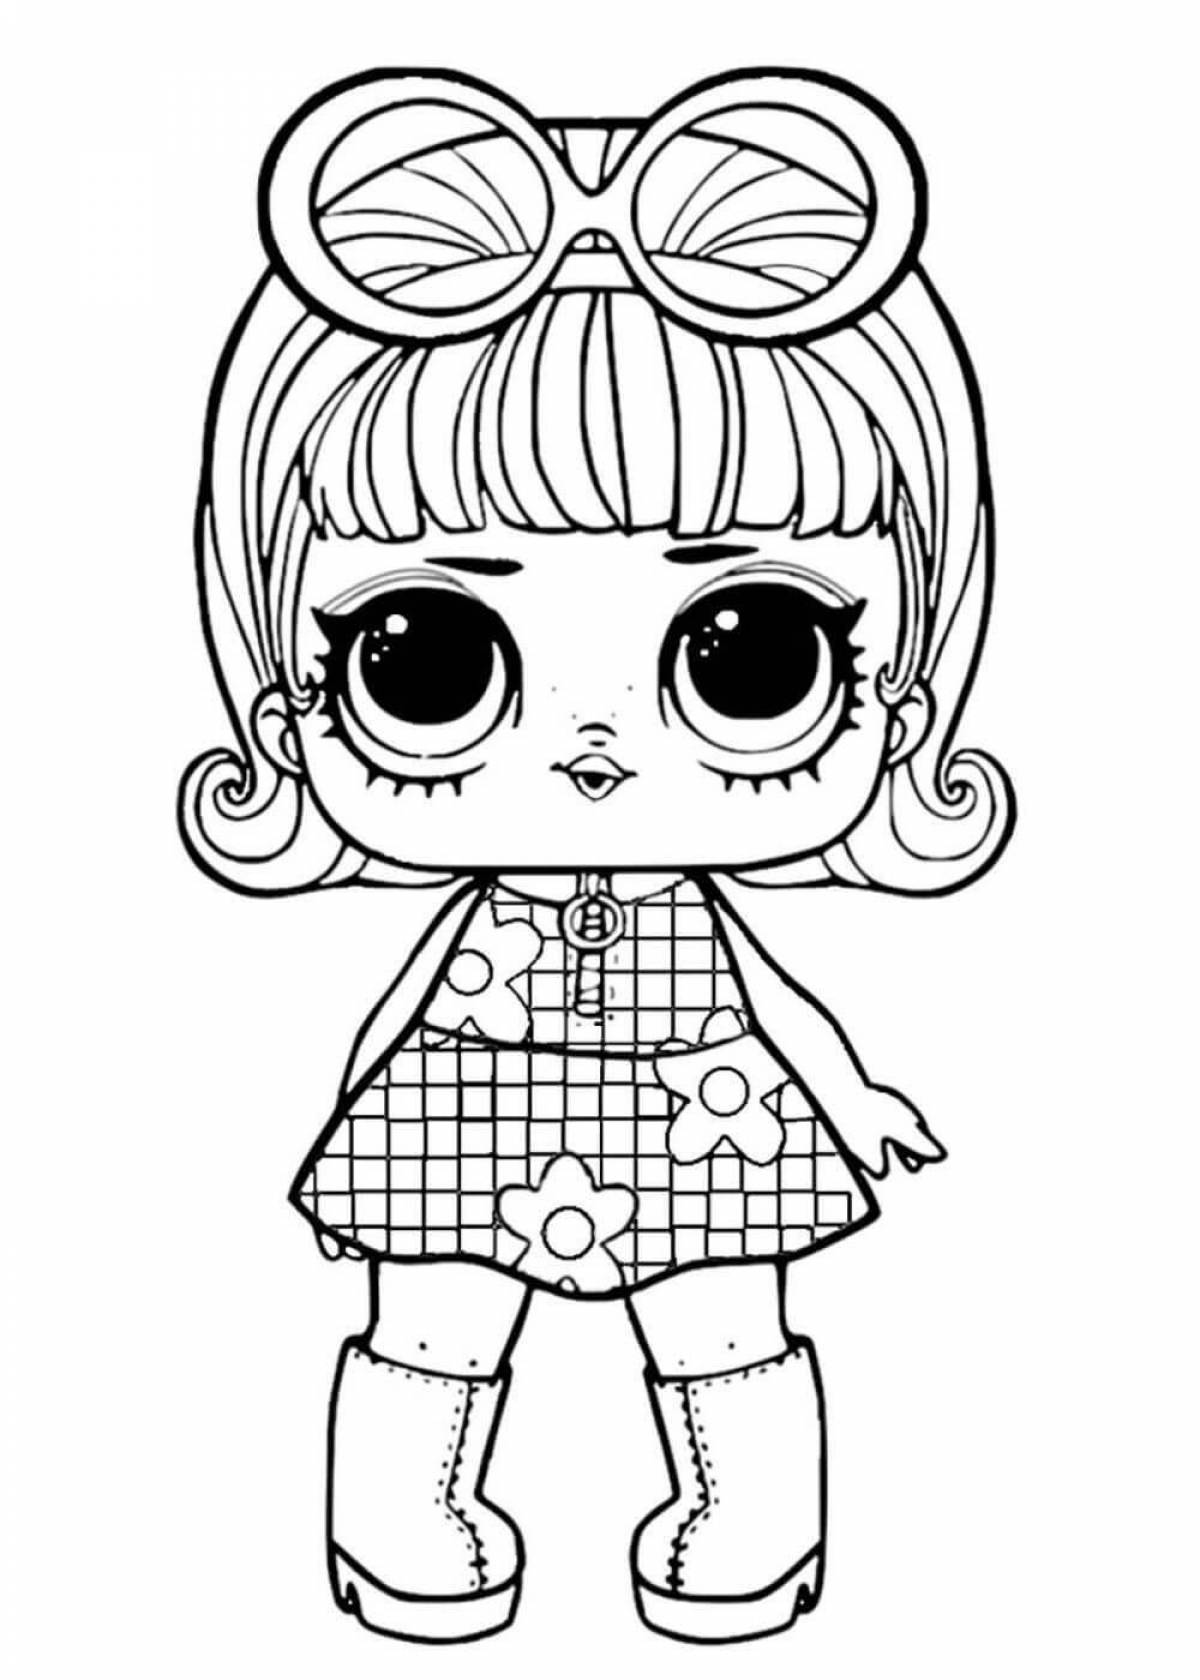 Playful coloring book for lol dolls